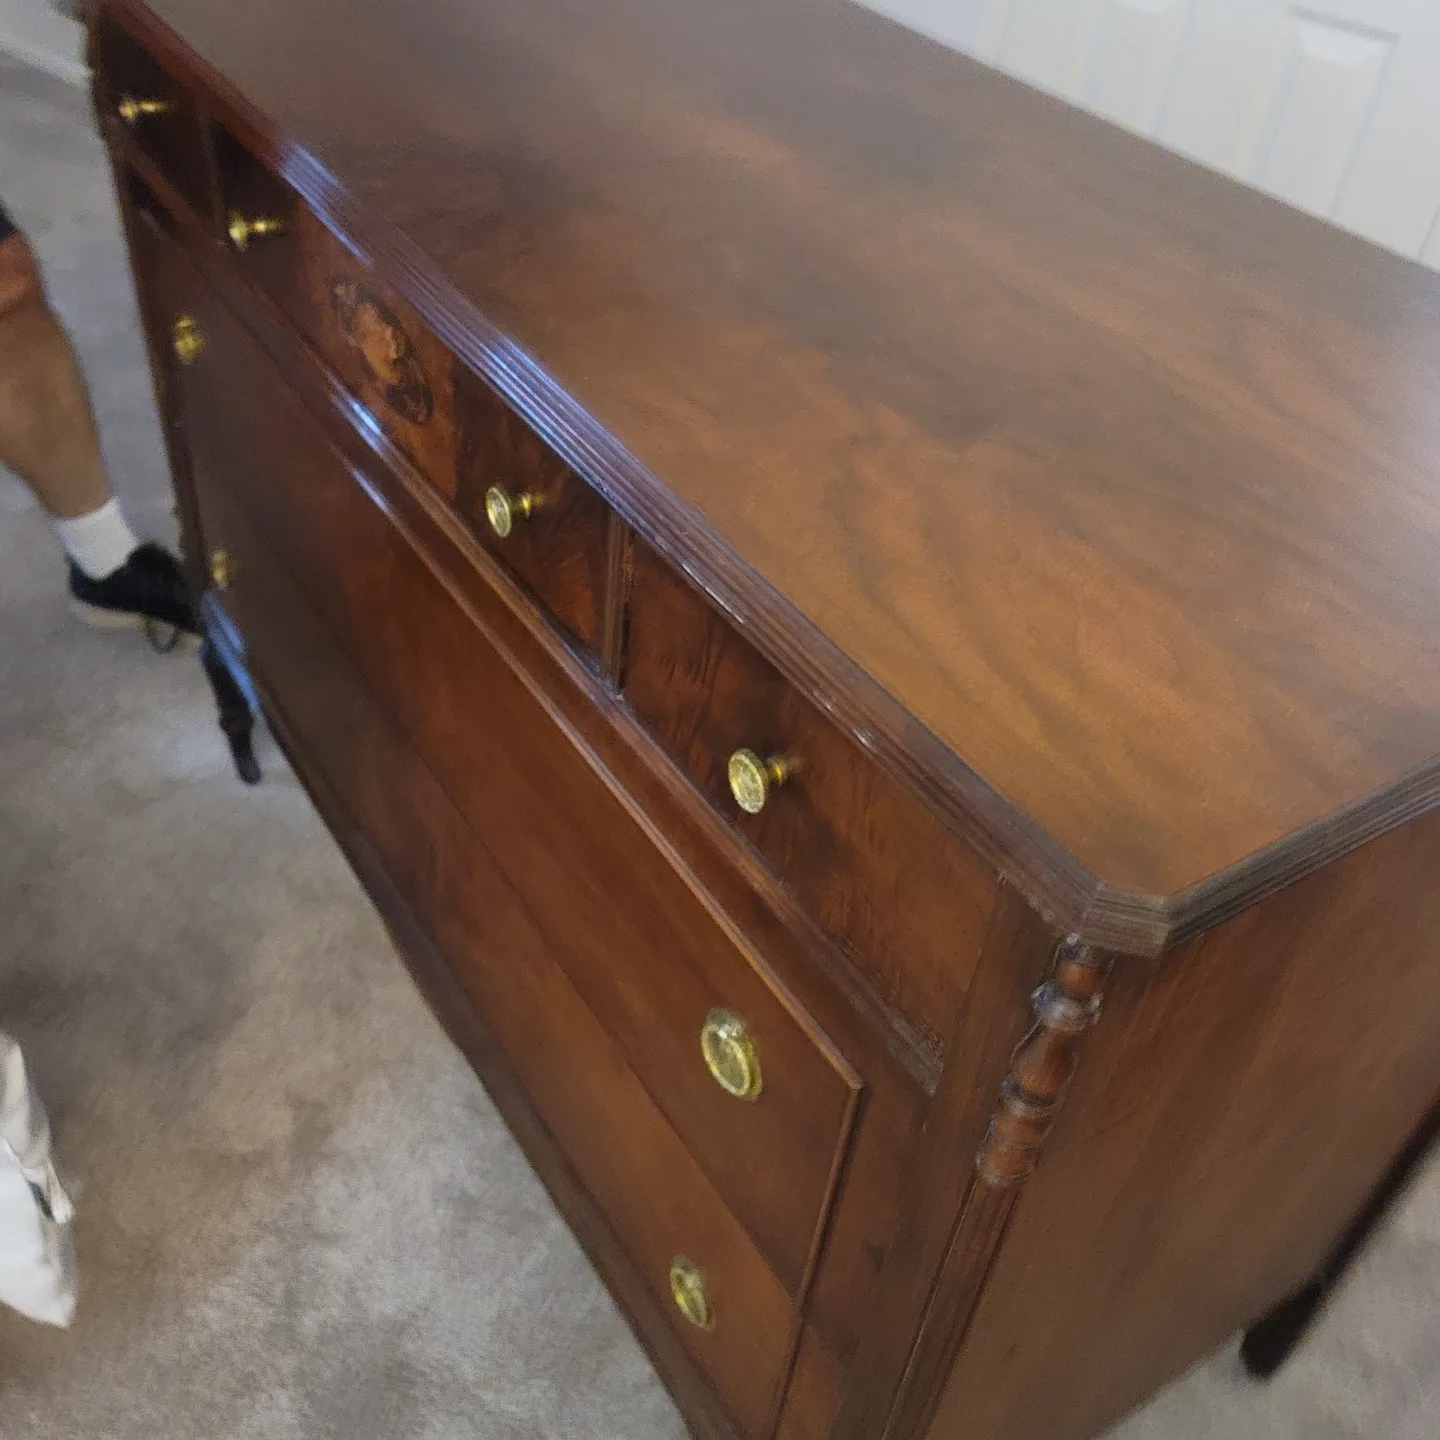 A Wooden Dresser Cabinet With Three Level Drawers